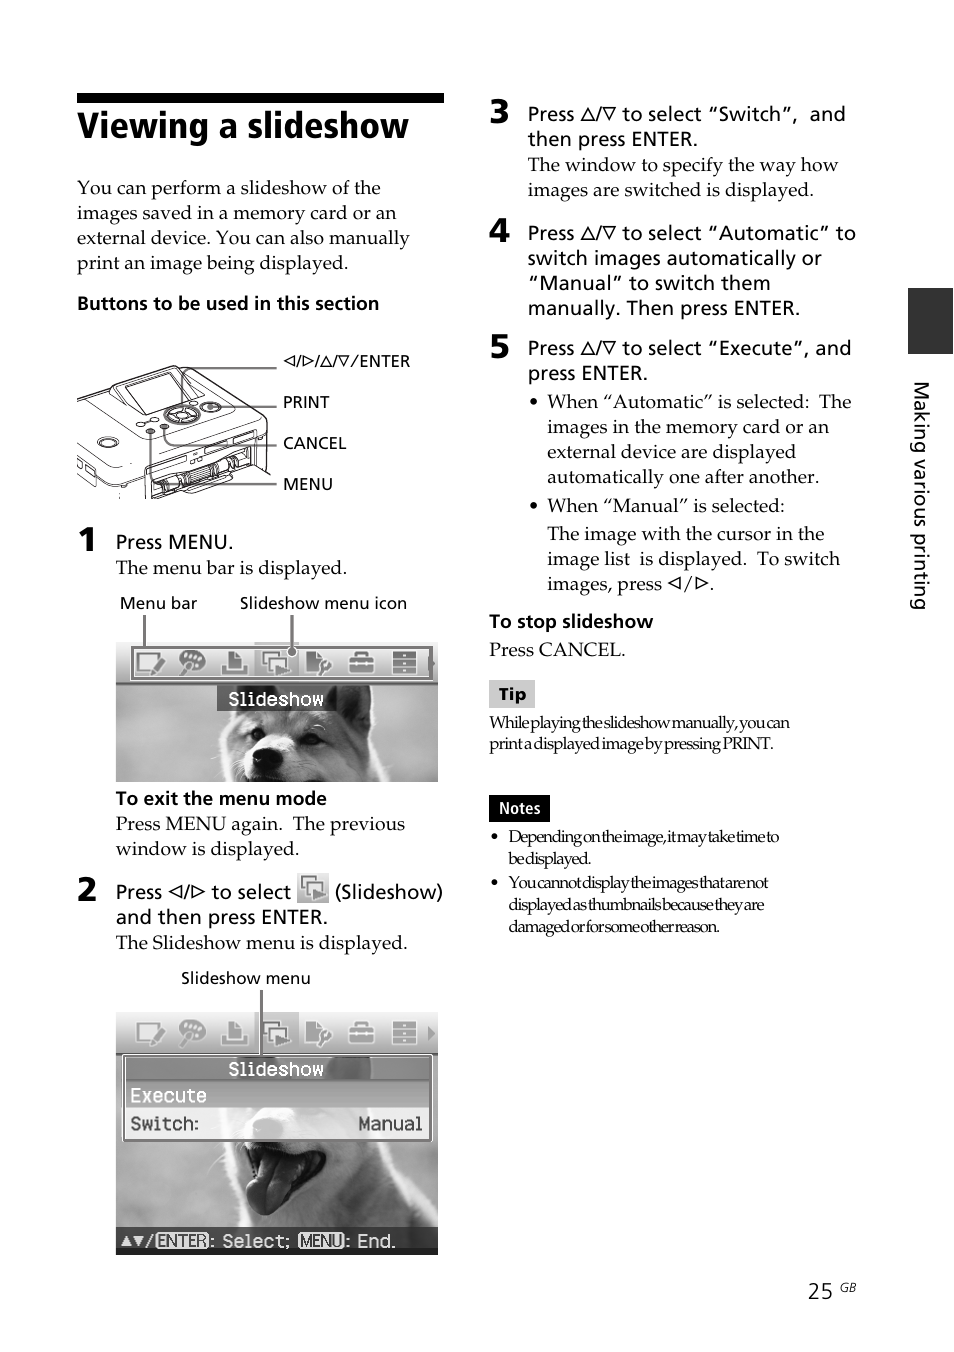 Viewing a slideshow, Slideshow | Sony DPP-FP70 User Manual | Page 25 / 84